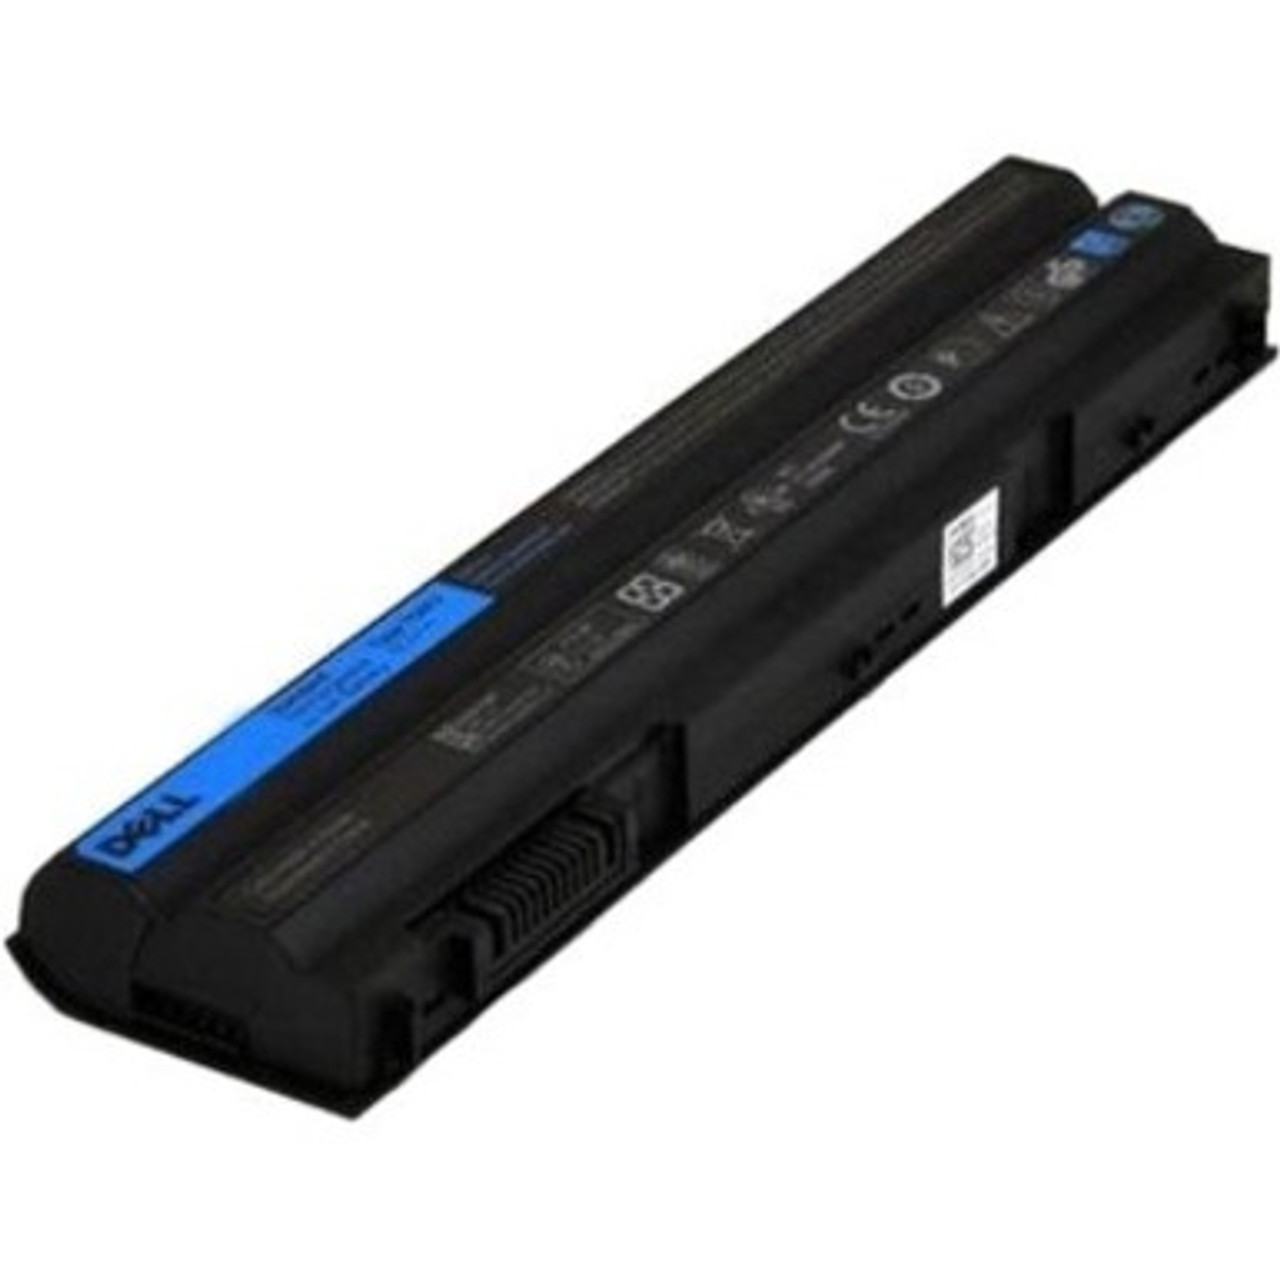 Dell 40 WHr 4-Cell Primary Lithium-Ion Battery